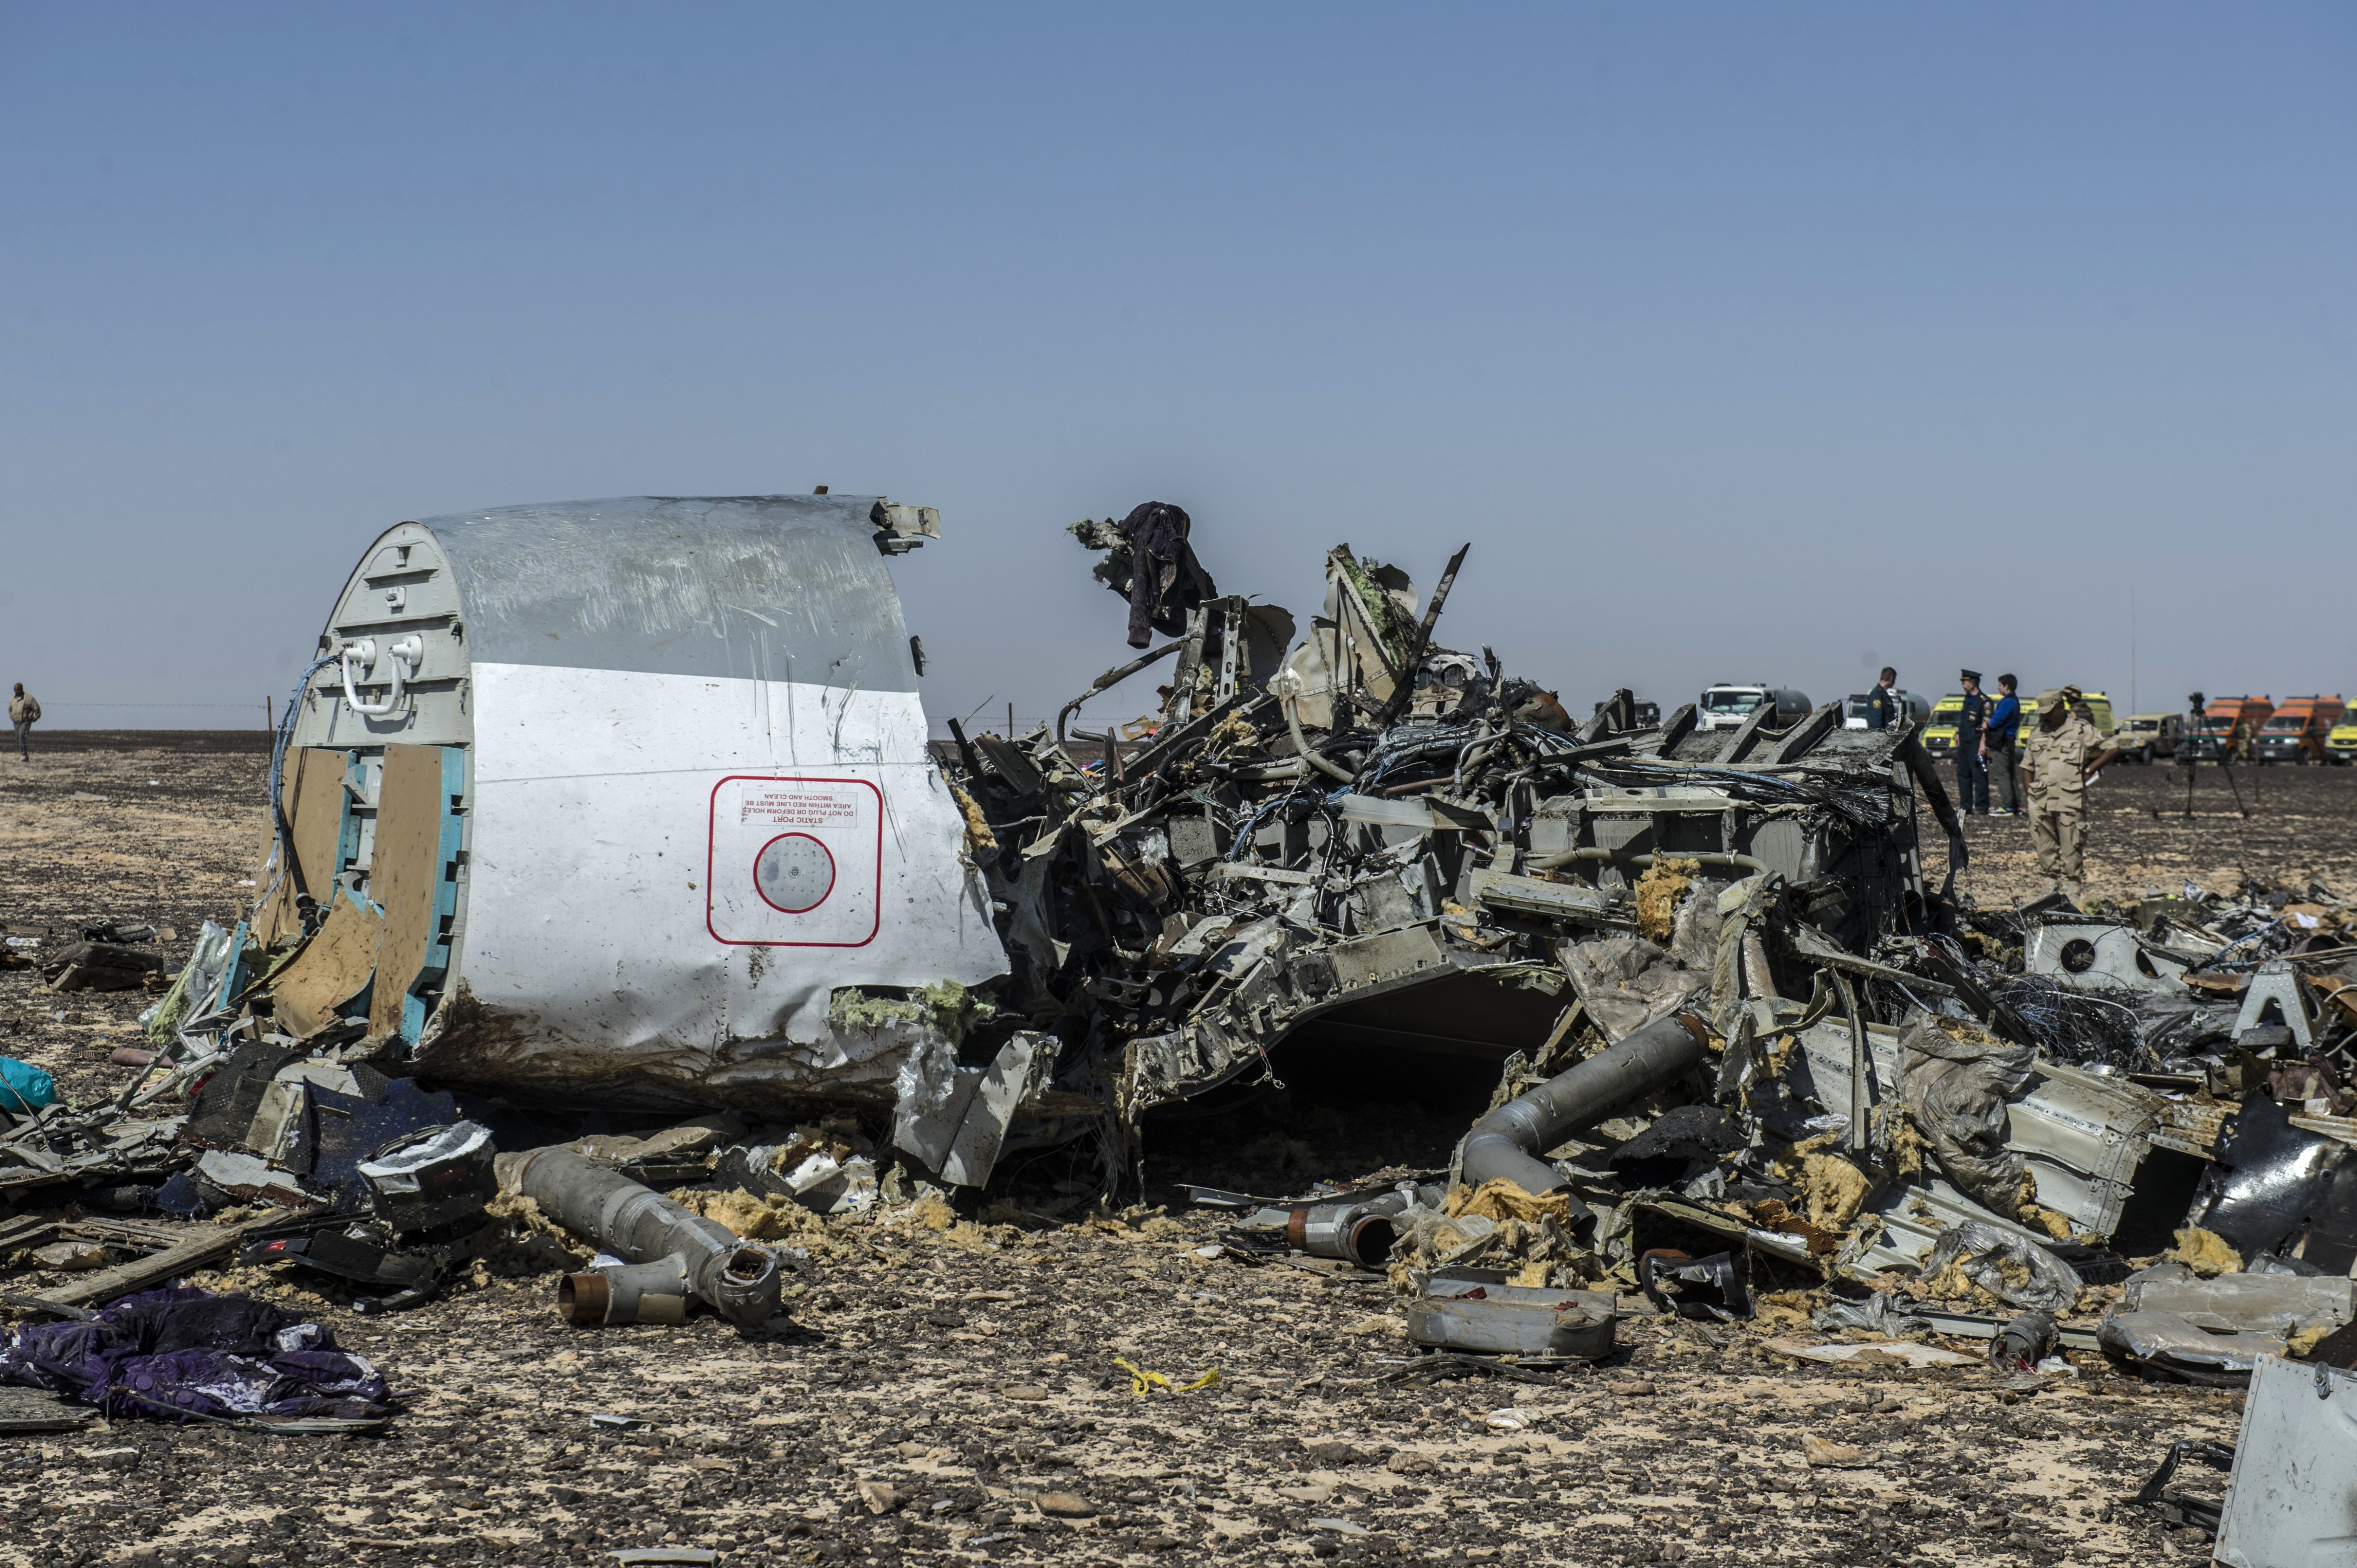 Debris of the A321 Russian airliner lie on the ground a day after the plane crashed in Wadi al-Zolomat, a mountainous area in Egypt's Sinai Peninsula, on Nov. 1. (Khaled Desouk—AFP/Getty Images)